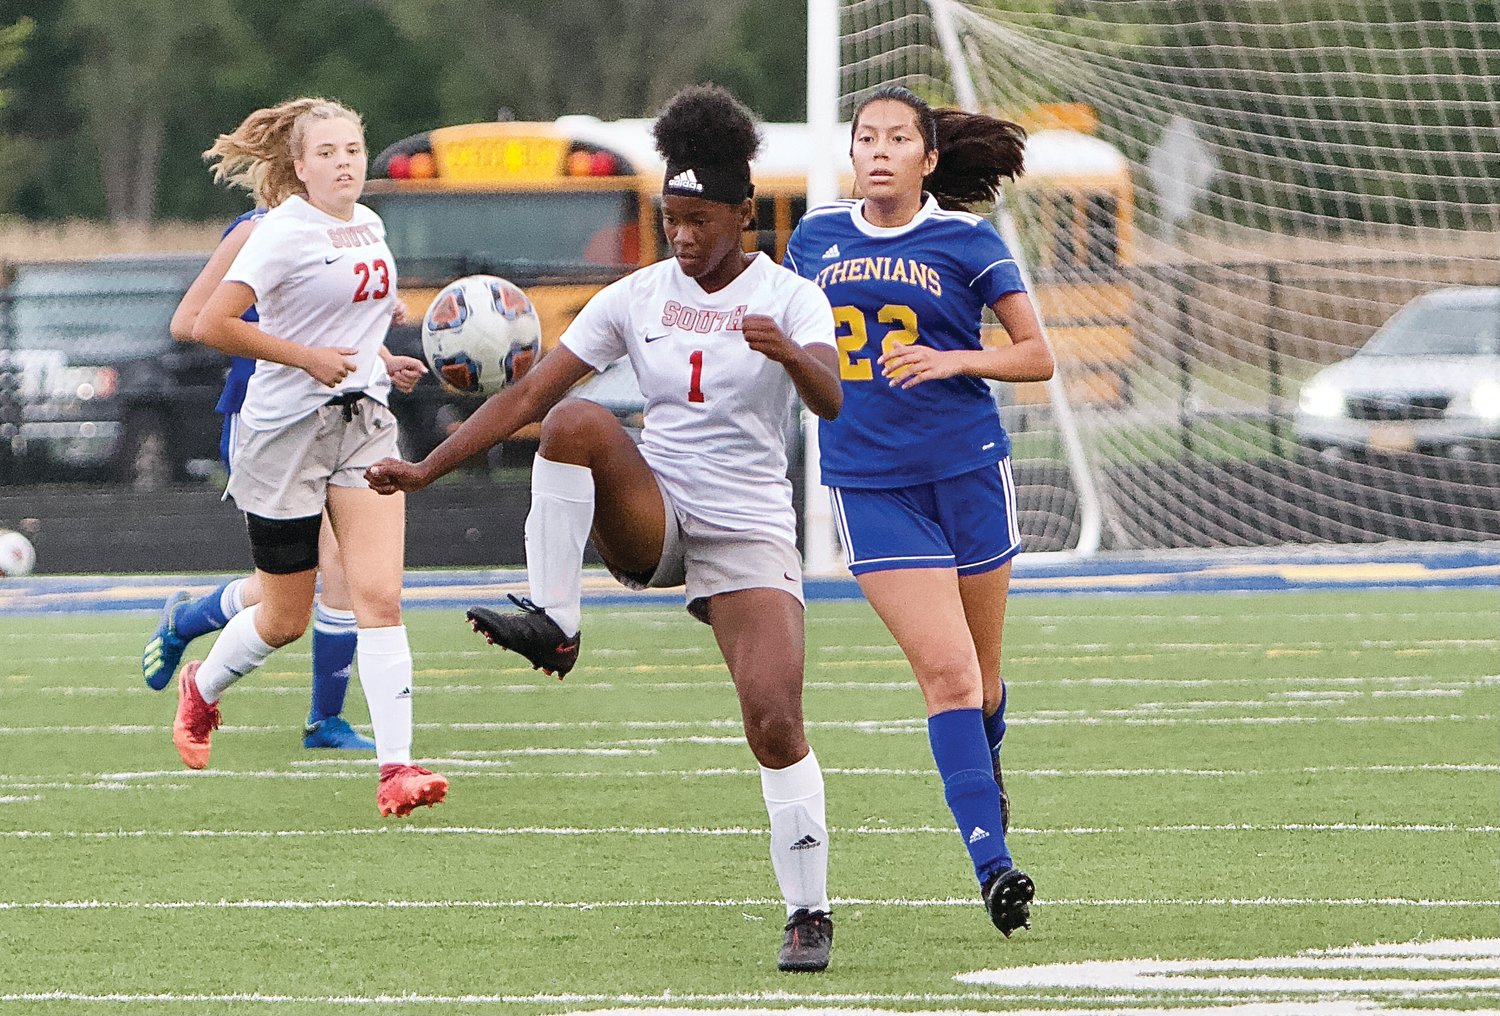 Southmont sophomore Shakia Burks juggles to keep the ball in front of her at Crawfordsville on Tuesday.